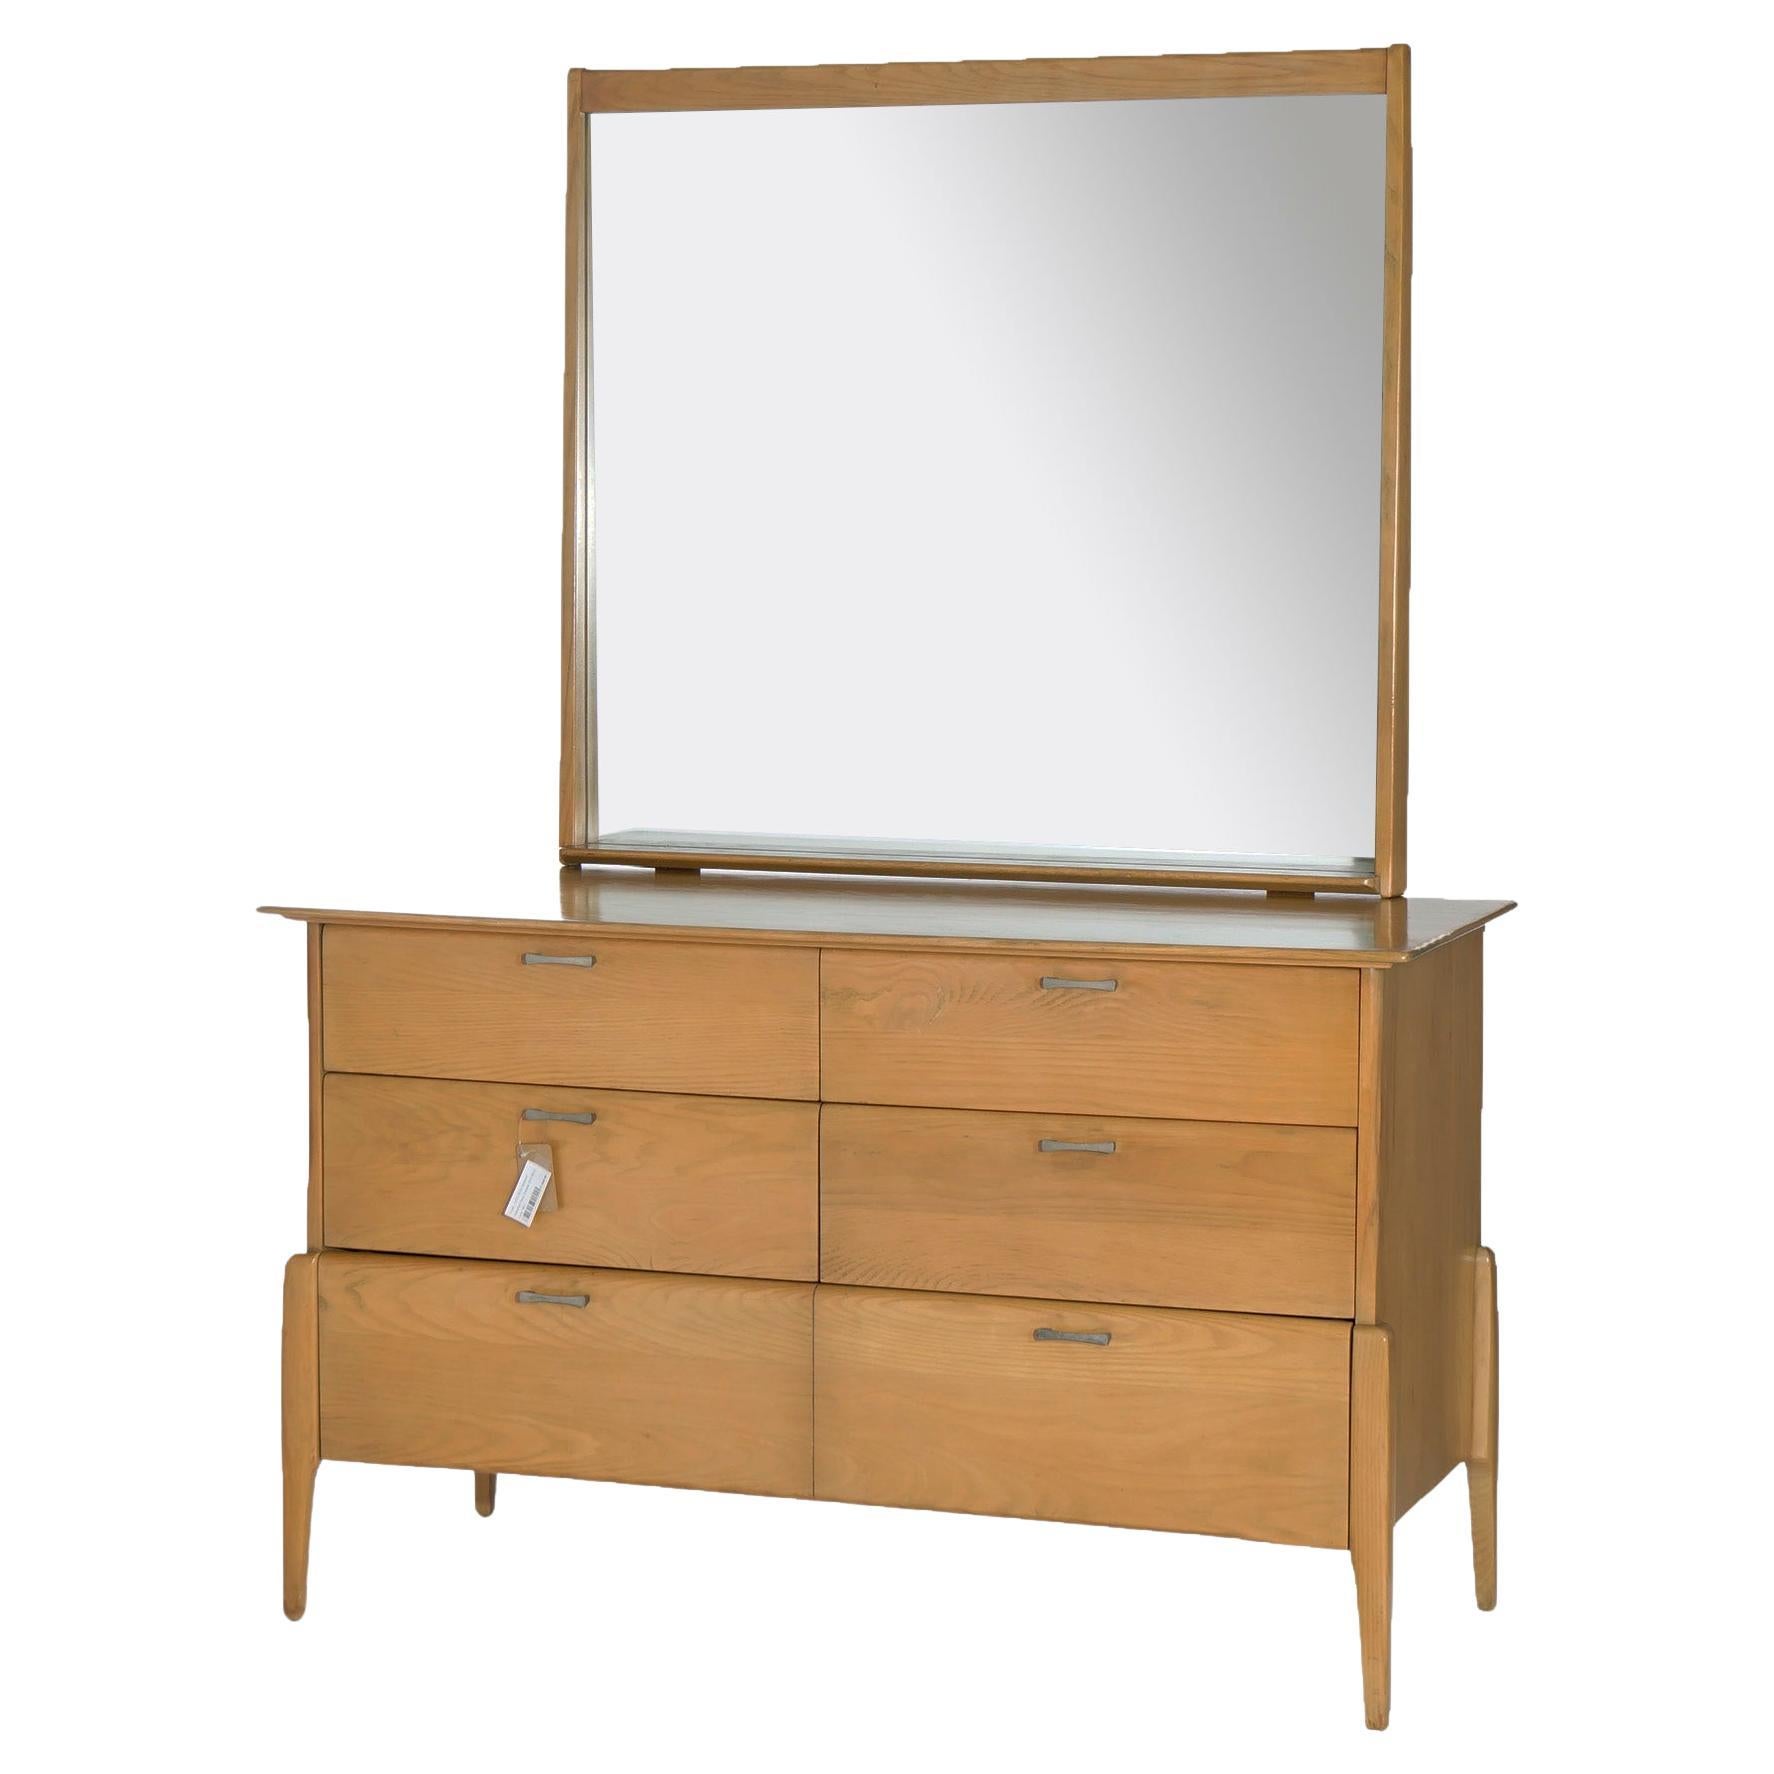 A Mid-Century Modern mirrored chest of drawers by Heywood Wakefield of the Prophecy collection offers four drawers over lower divided drawer, raised on tapered legs, Fawn finish, maker mark as photographed, c1950.

Measures- 67.75'' H x 48.75'' W